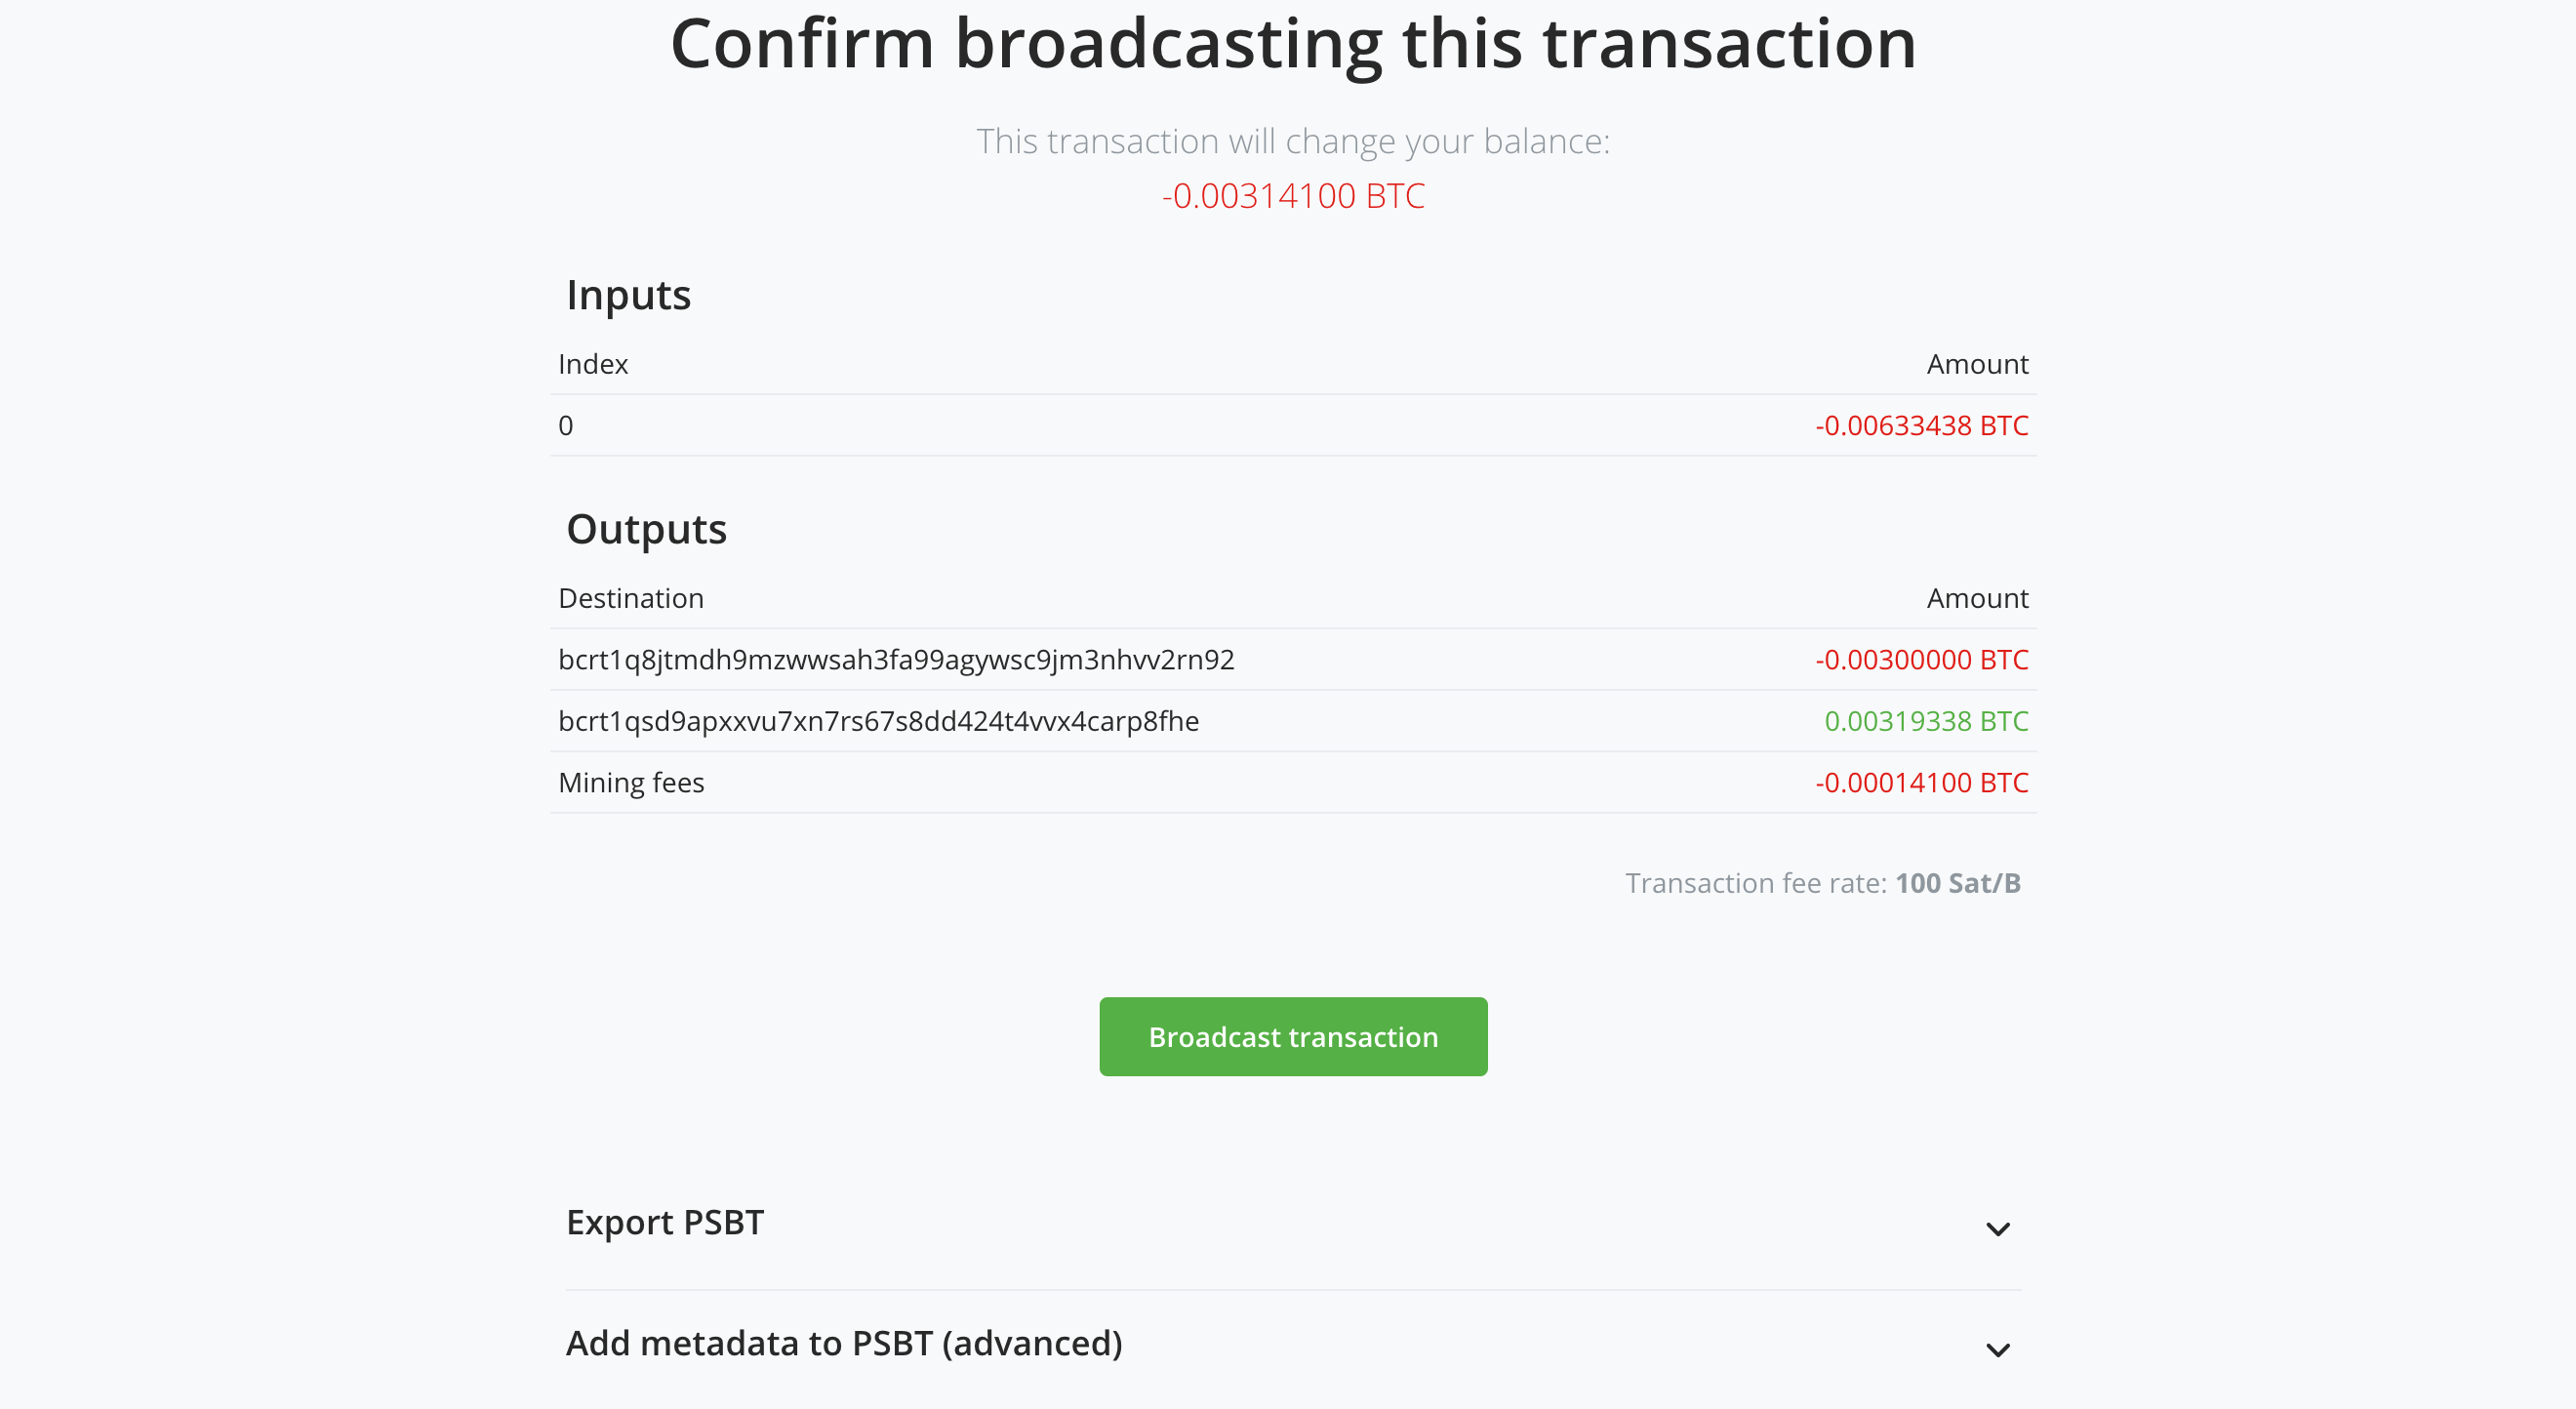 BTCPay Server Transaction Review and Broadcast page